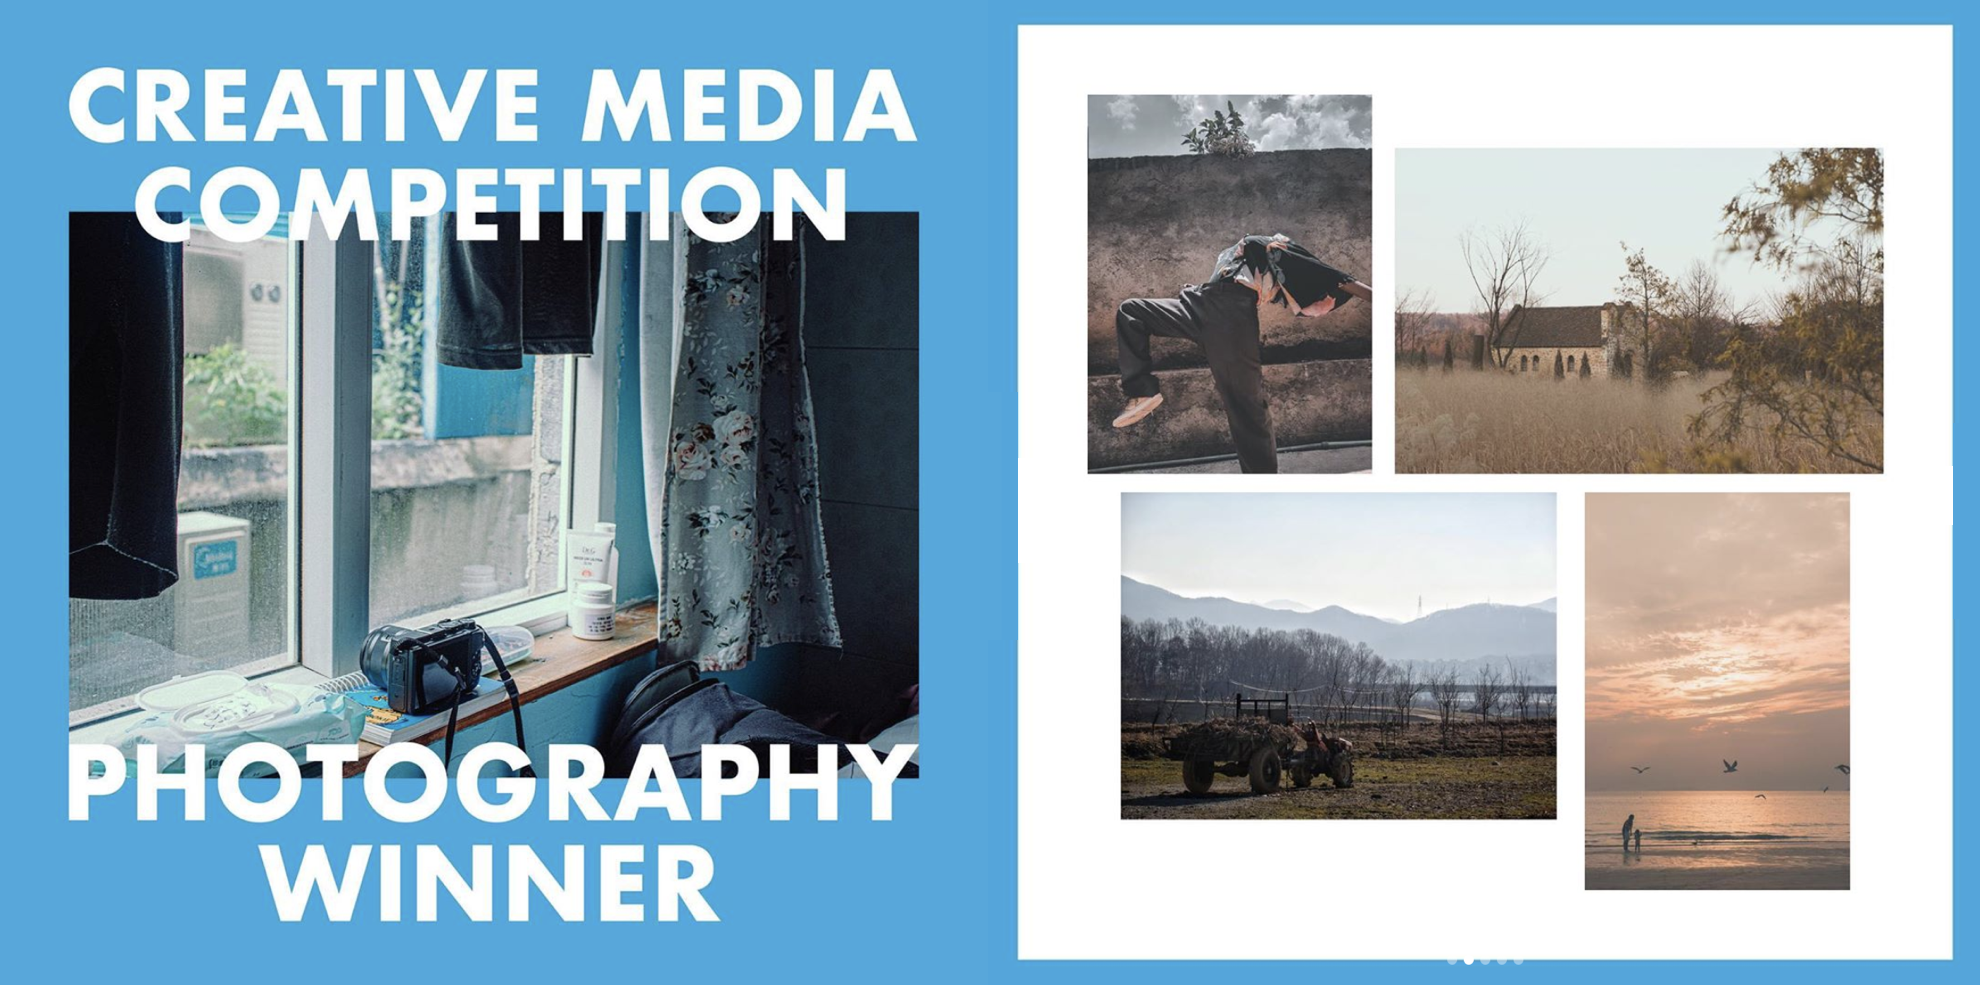 Photo 2: Winner and a portion of submissions for CMC: ‘Photography’